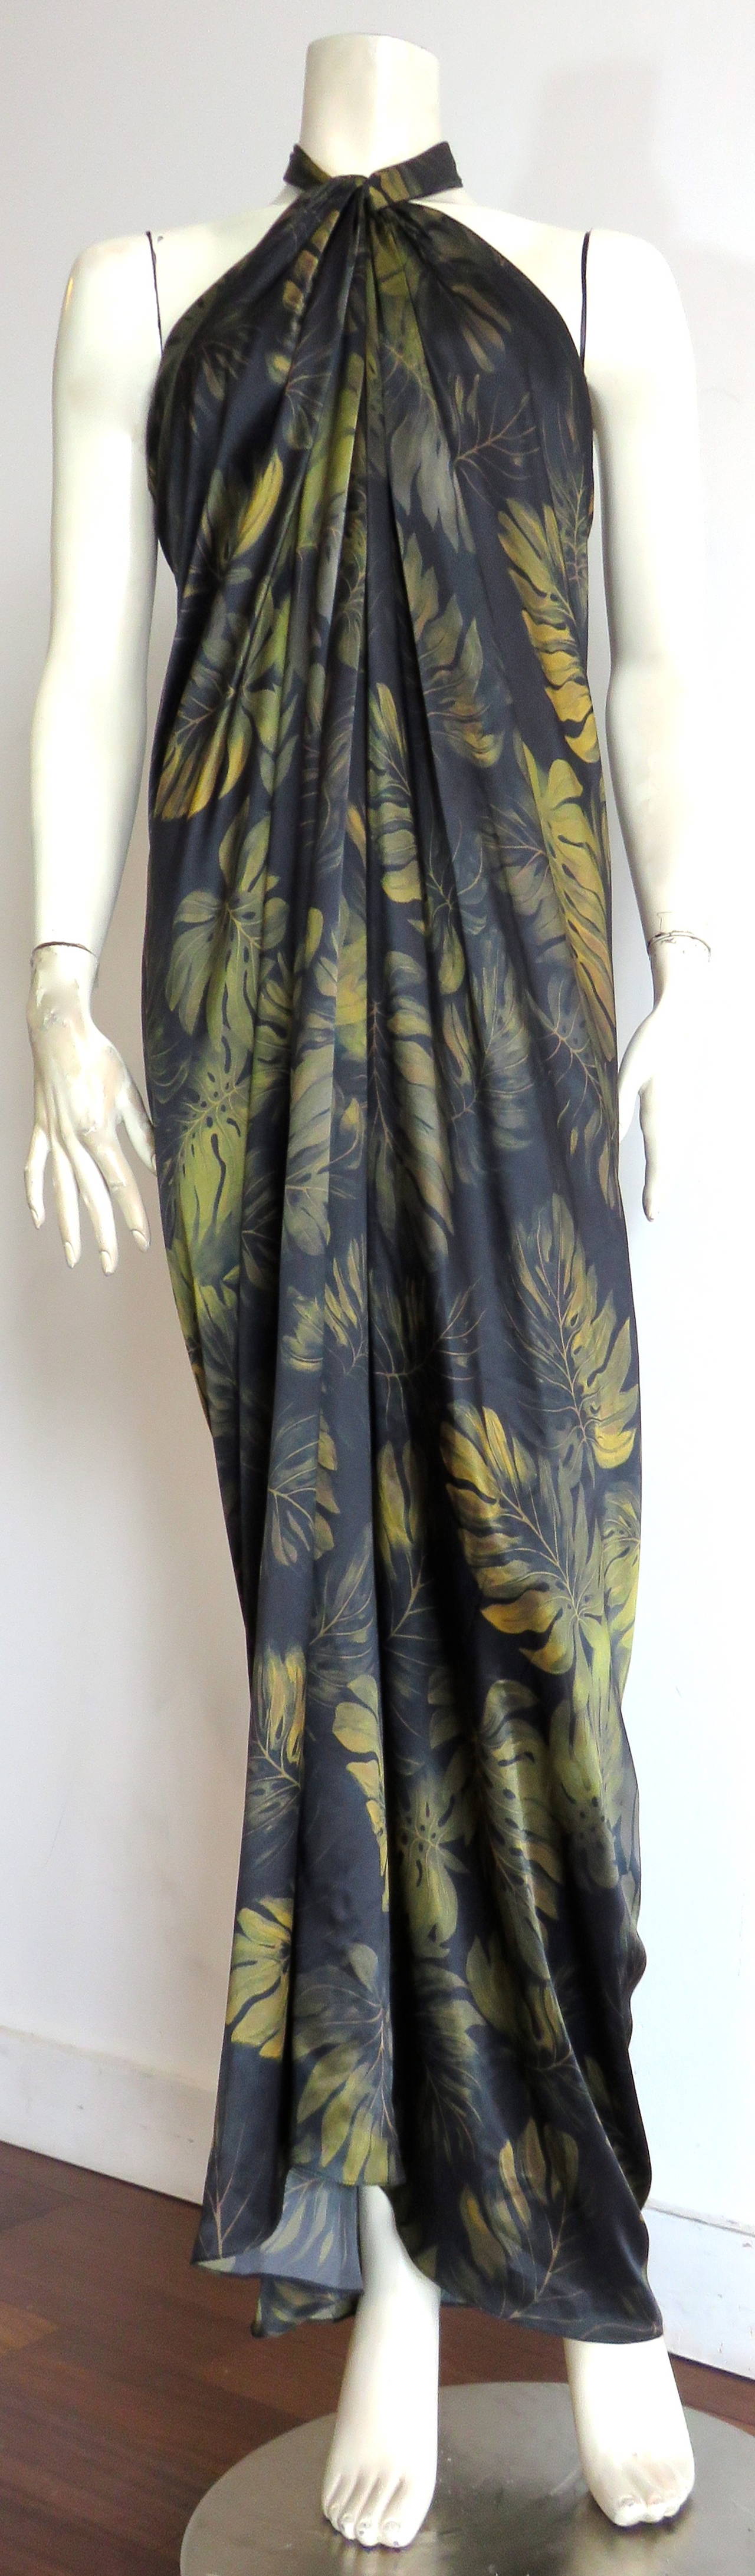 Never worn, LANVIN by Alber Elbaz, 100% silk, palm-print halter neck dress.

Painted palm leaf artwork in deep shades of dark green, and black.

Luxuriously soft, silk charmeuse fabrication.

Adjustable, halter-neck sash ties with twisted